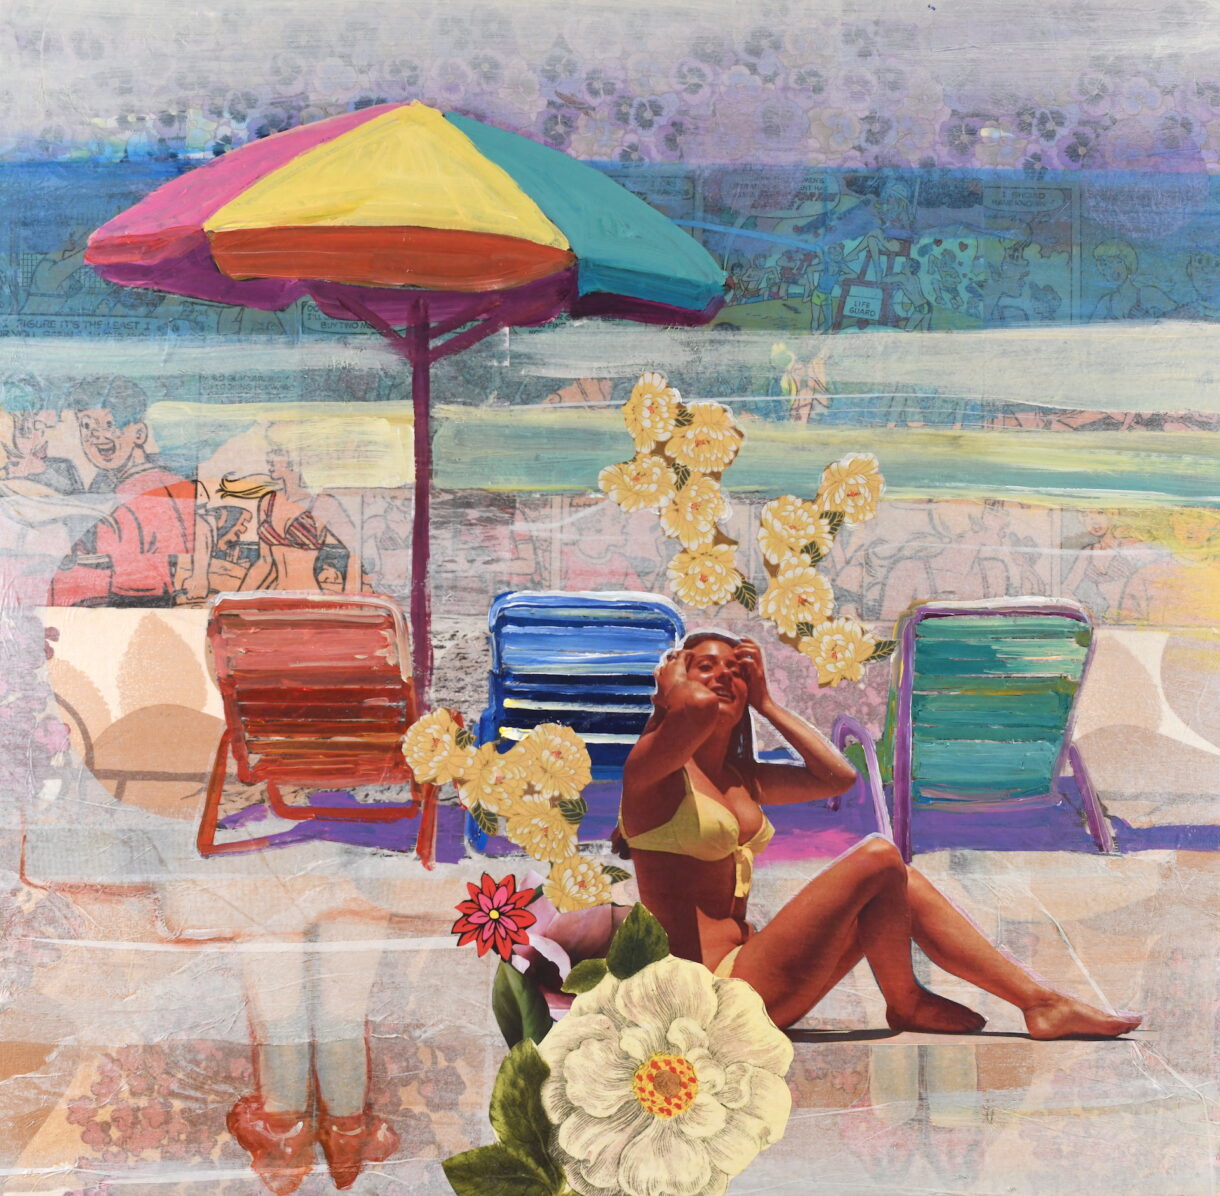 a beach with a woman in the sun with umbrellas